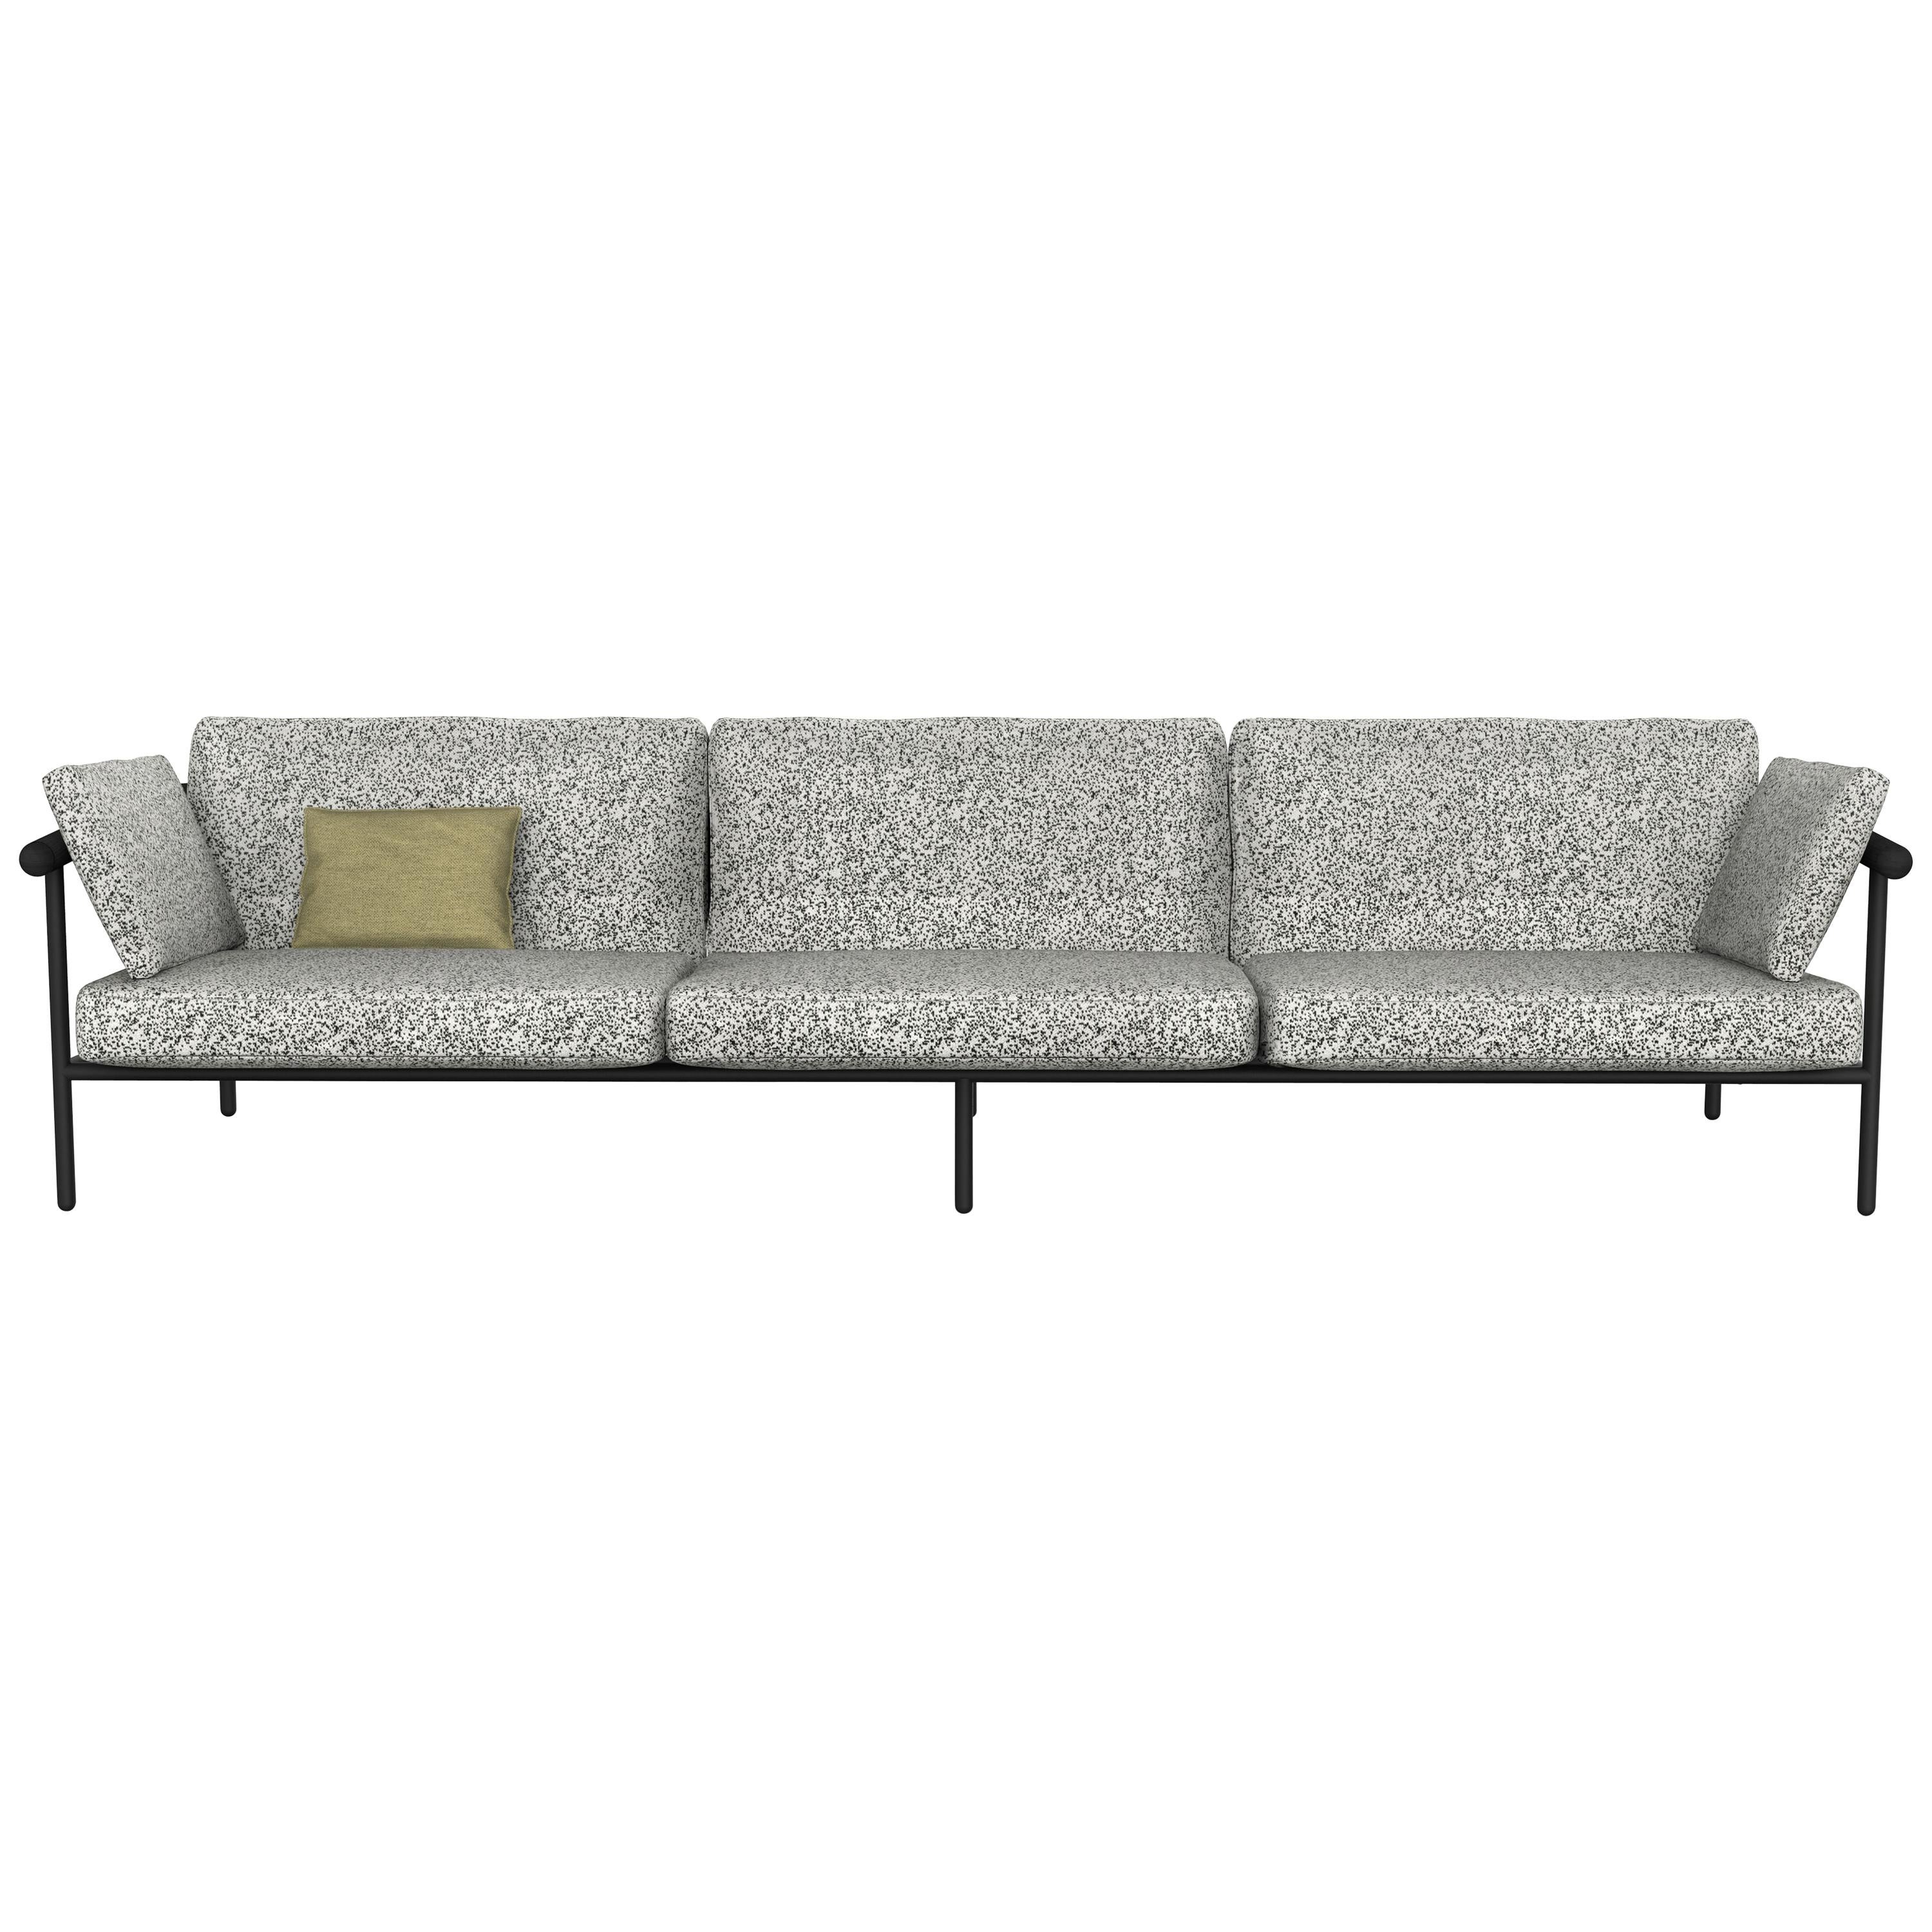 Upholstered "X-Rays" Sofa, Alain Gilles For Sale